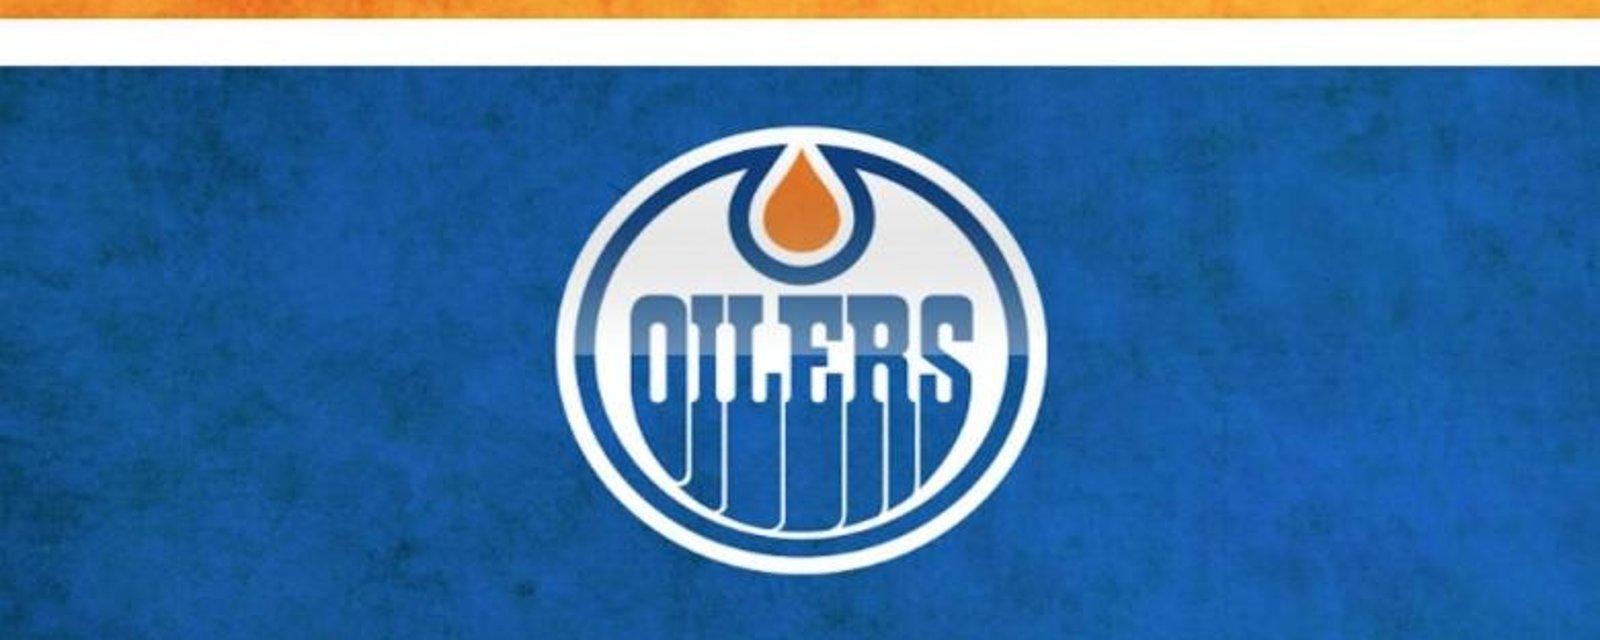 Undisciplined Oilers lose to the Coyotes.